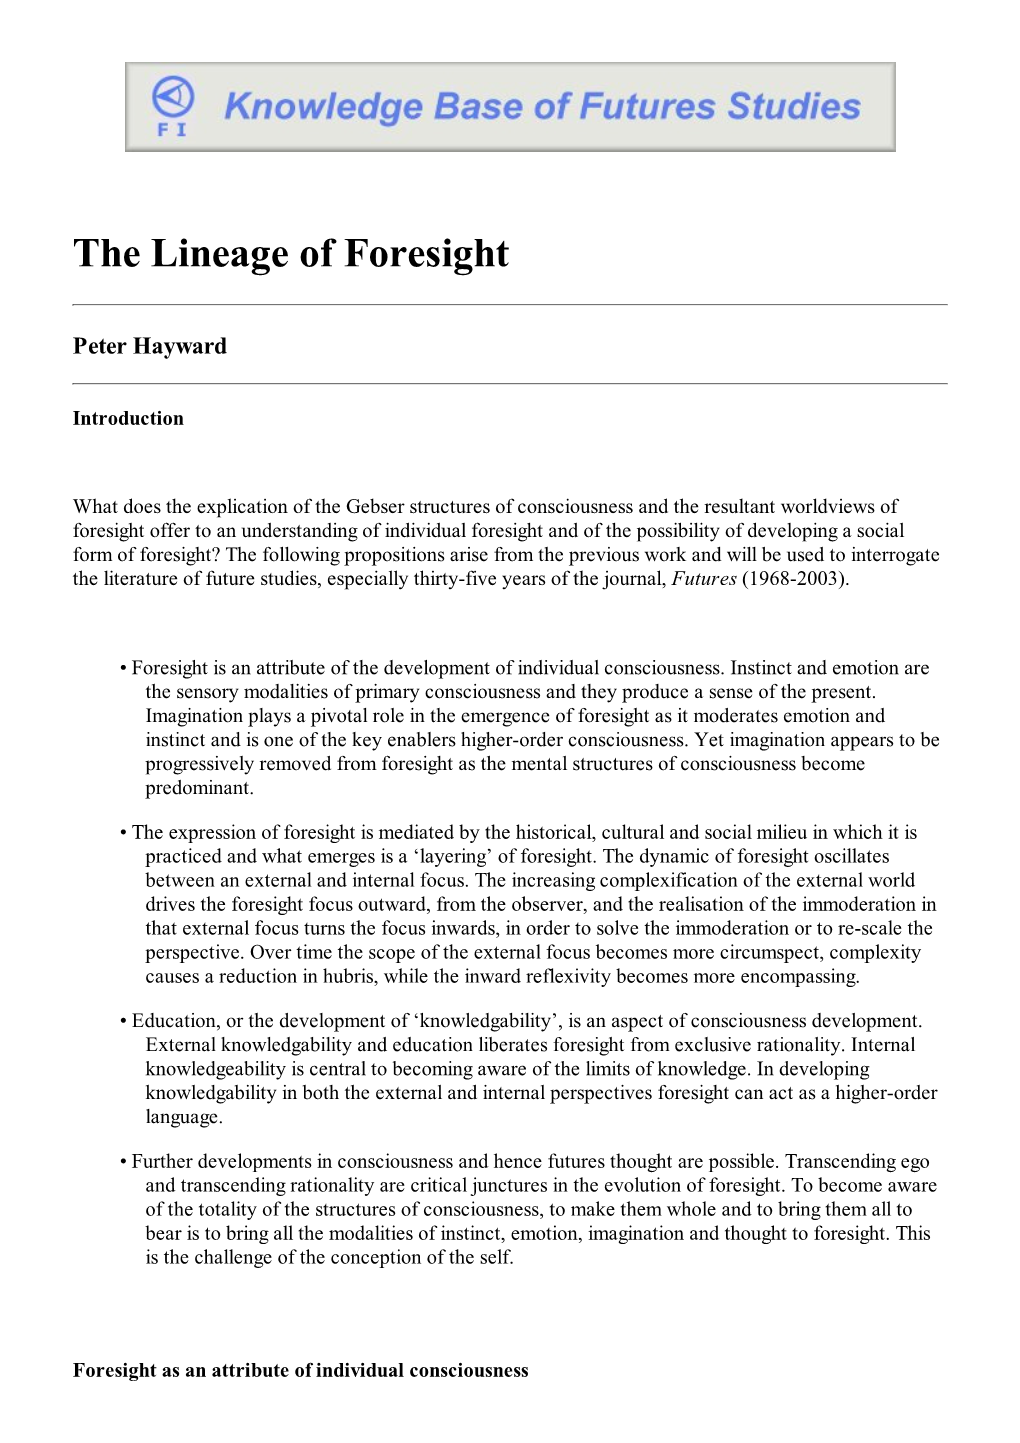 The Lineage of Foresight